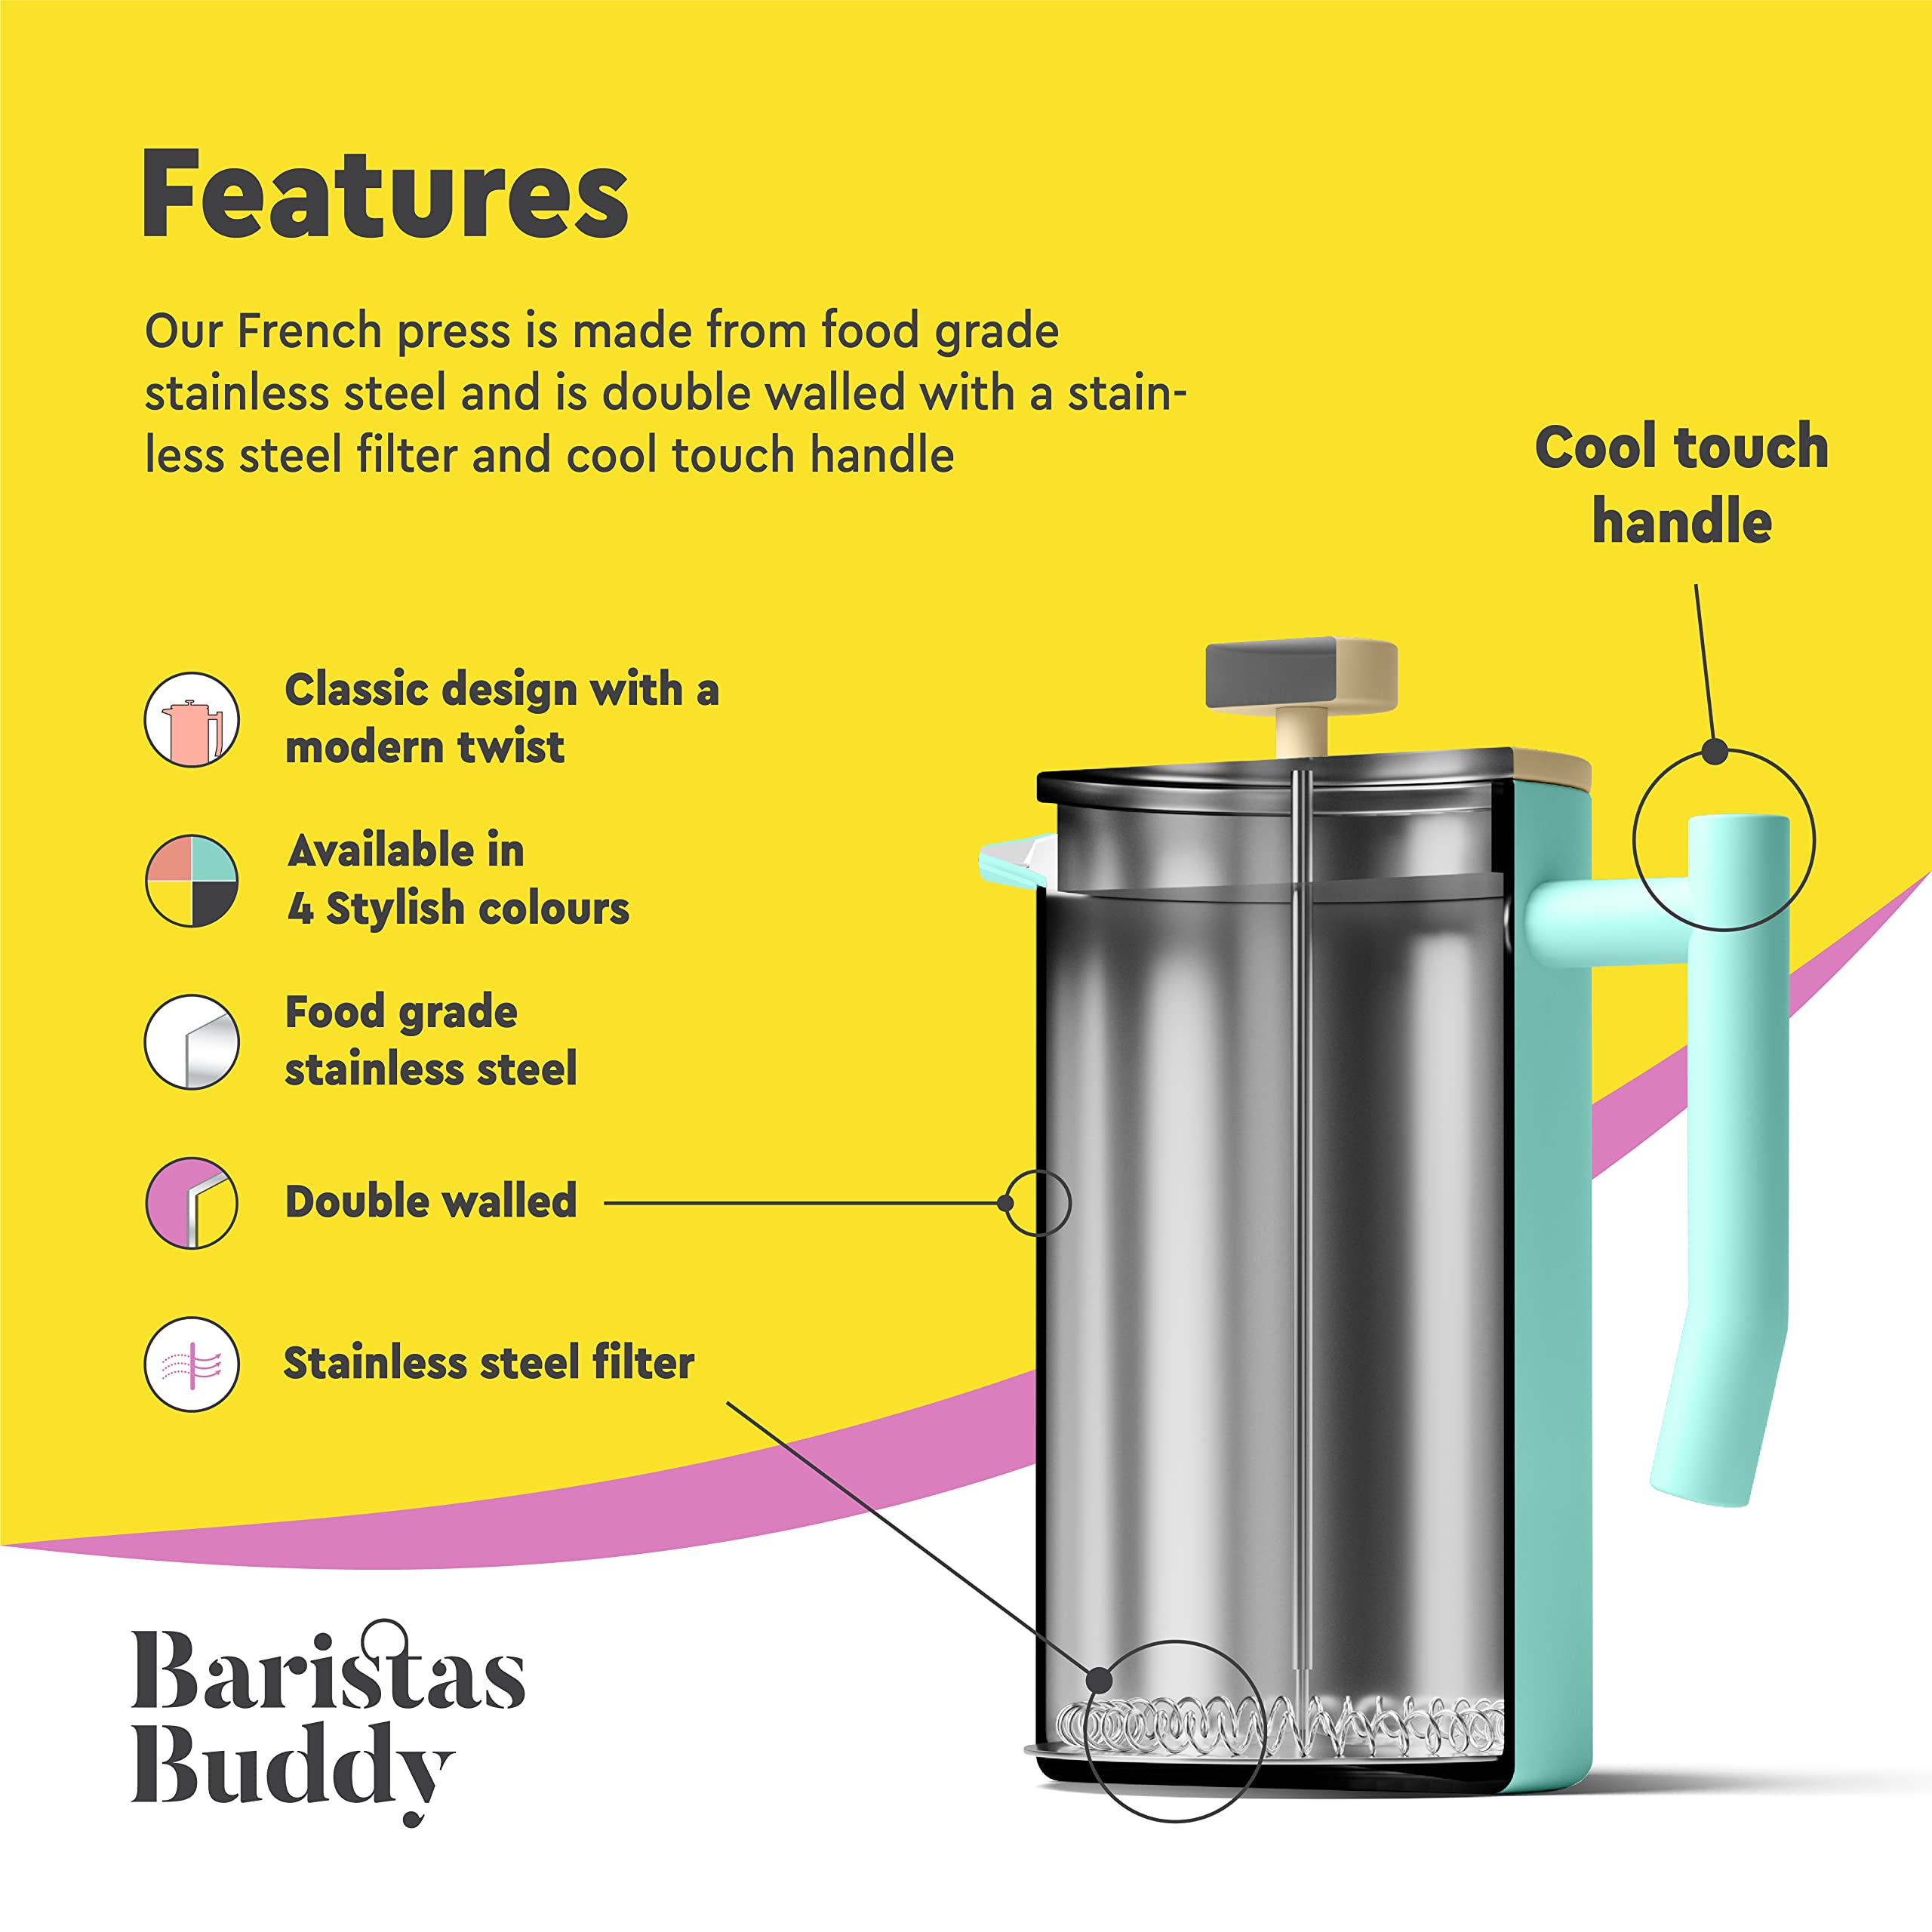 BaristasBuddy Stainless Steel French Press Coffee Maker - Insulated Brewer For Home, Camping Or Travel - Large 34oz Capacity